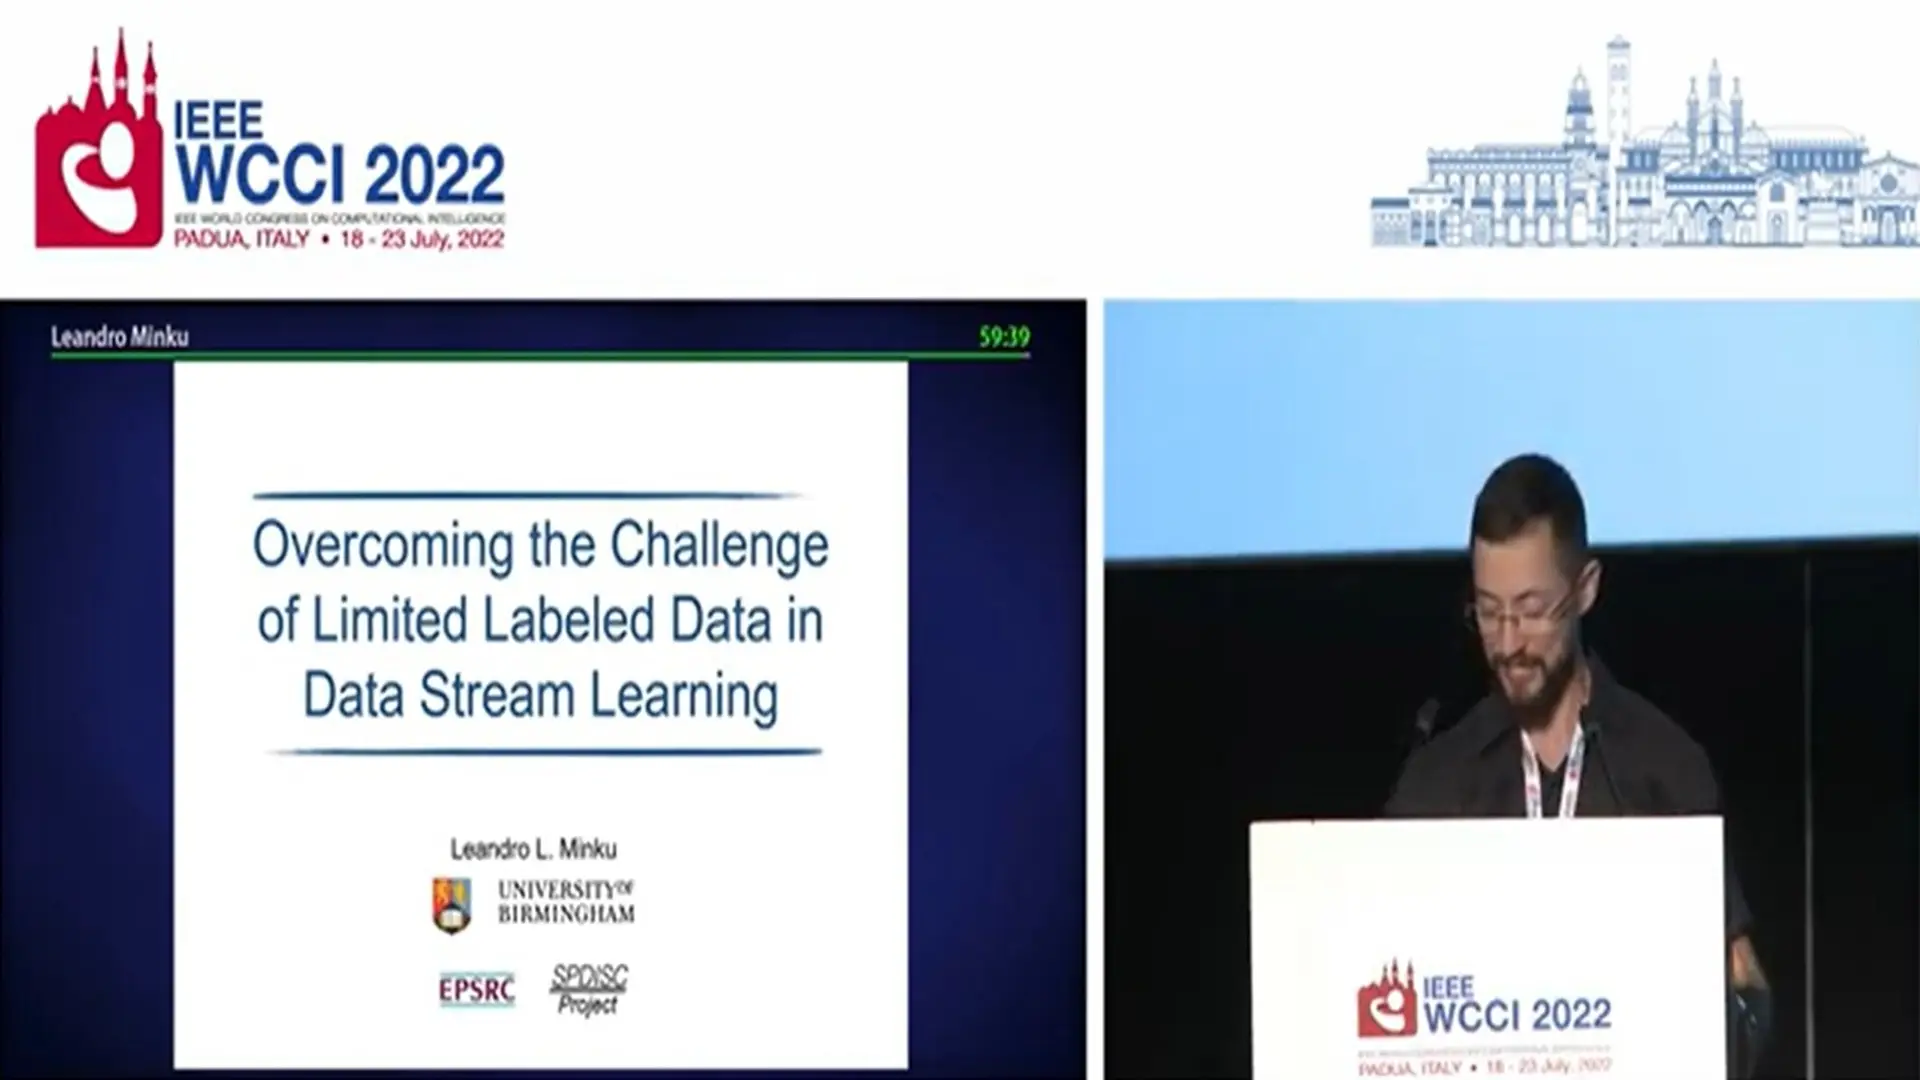 Keynote - Overcoming the Challenge of Limited Labeled Data in Online Data Stream Learning